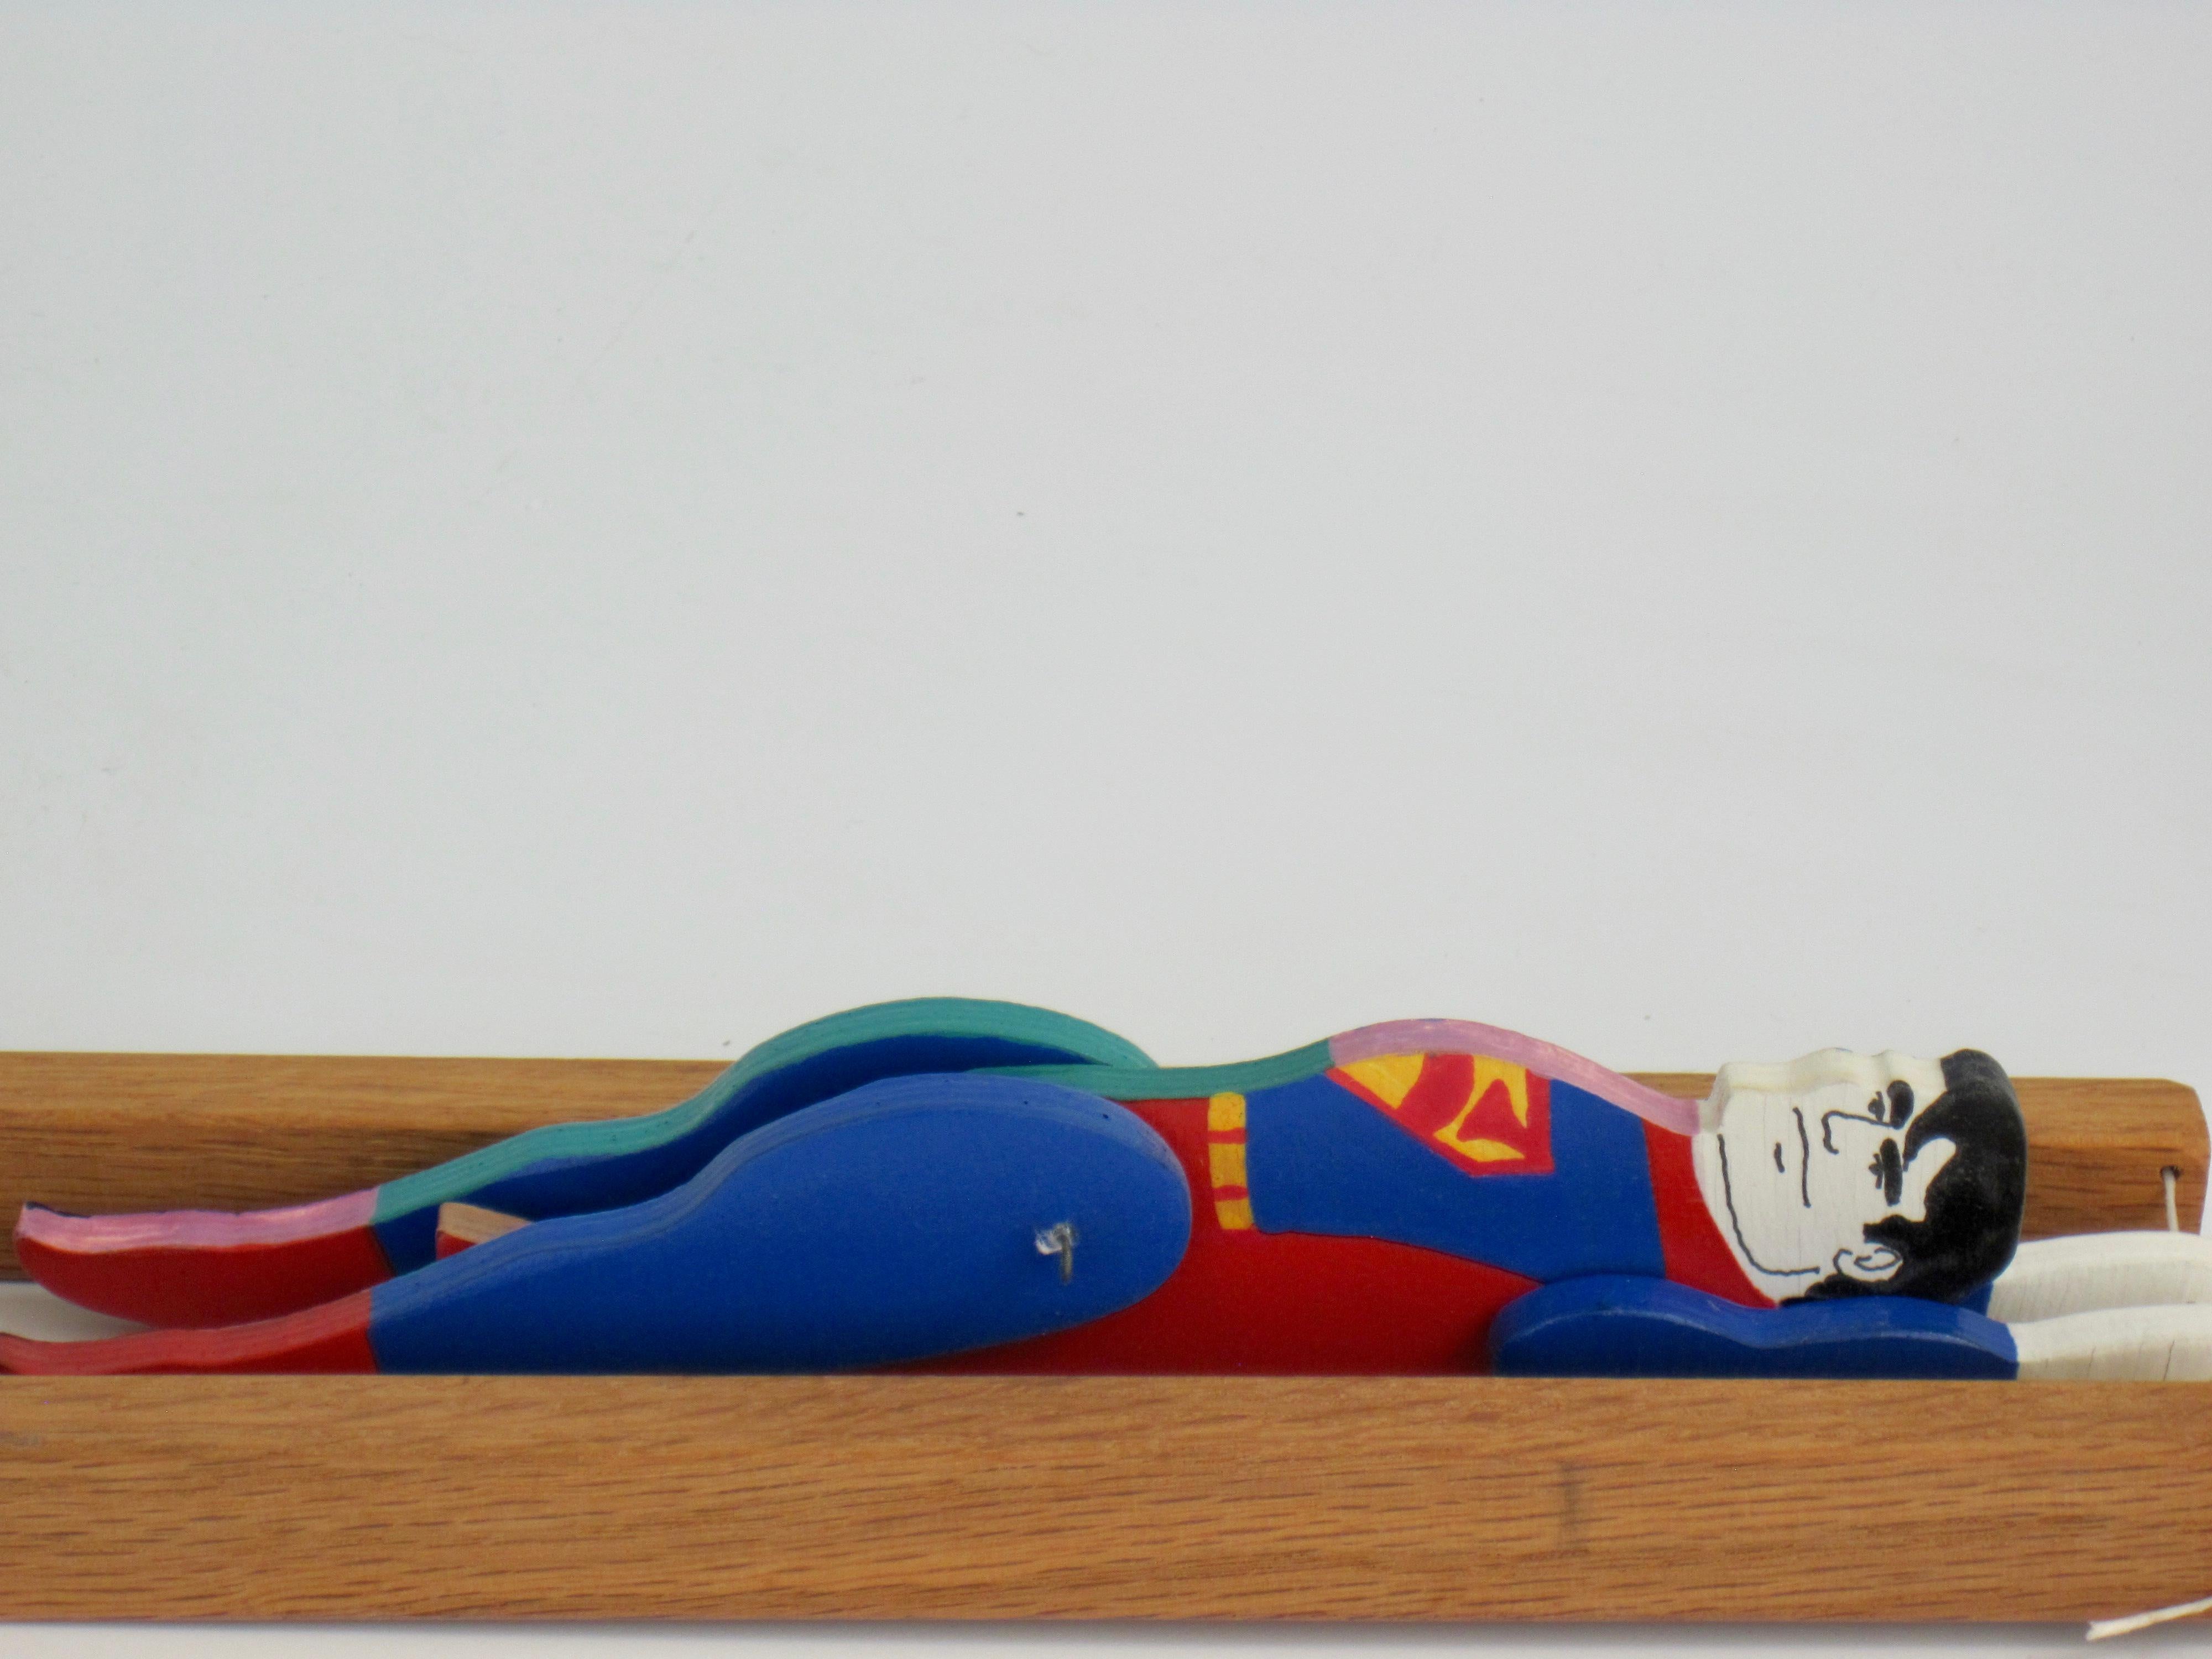 Superman/Clark Kent Wooden Trapeze Artist Toy with Graffiti Phone Booth For Sale 4